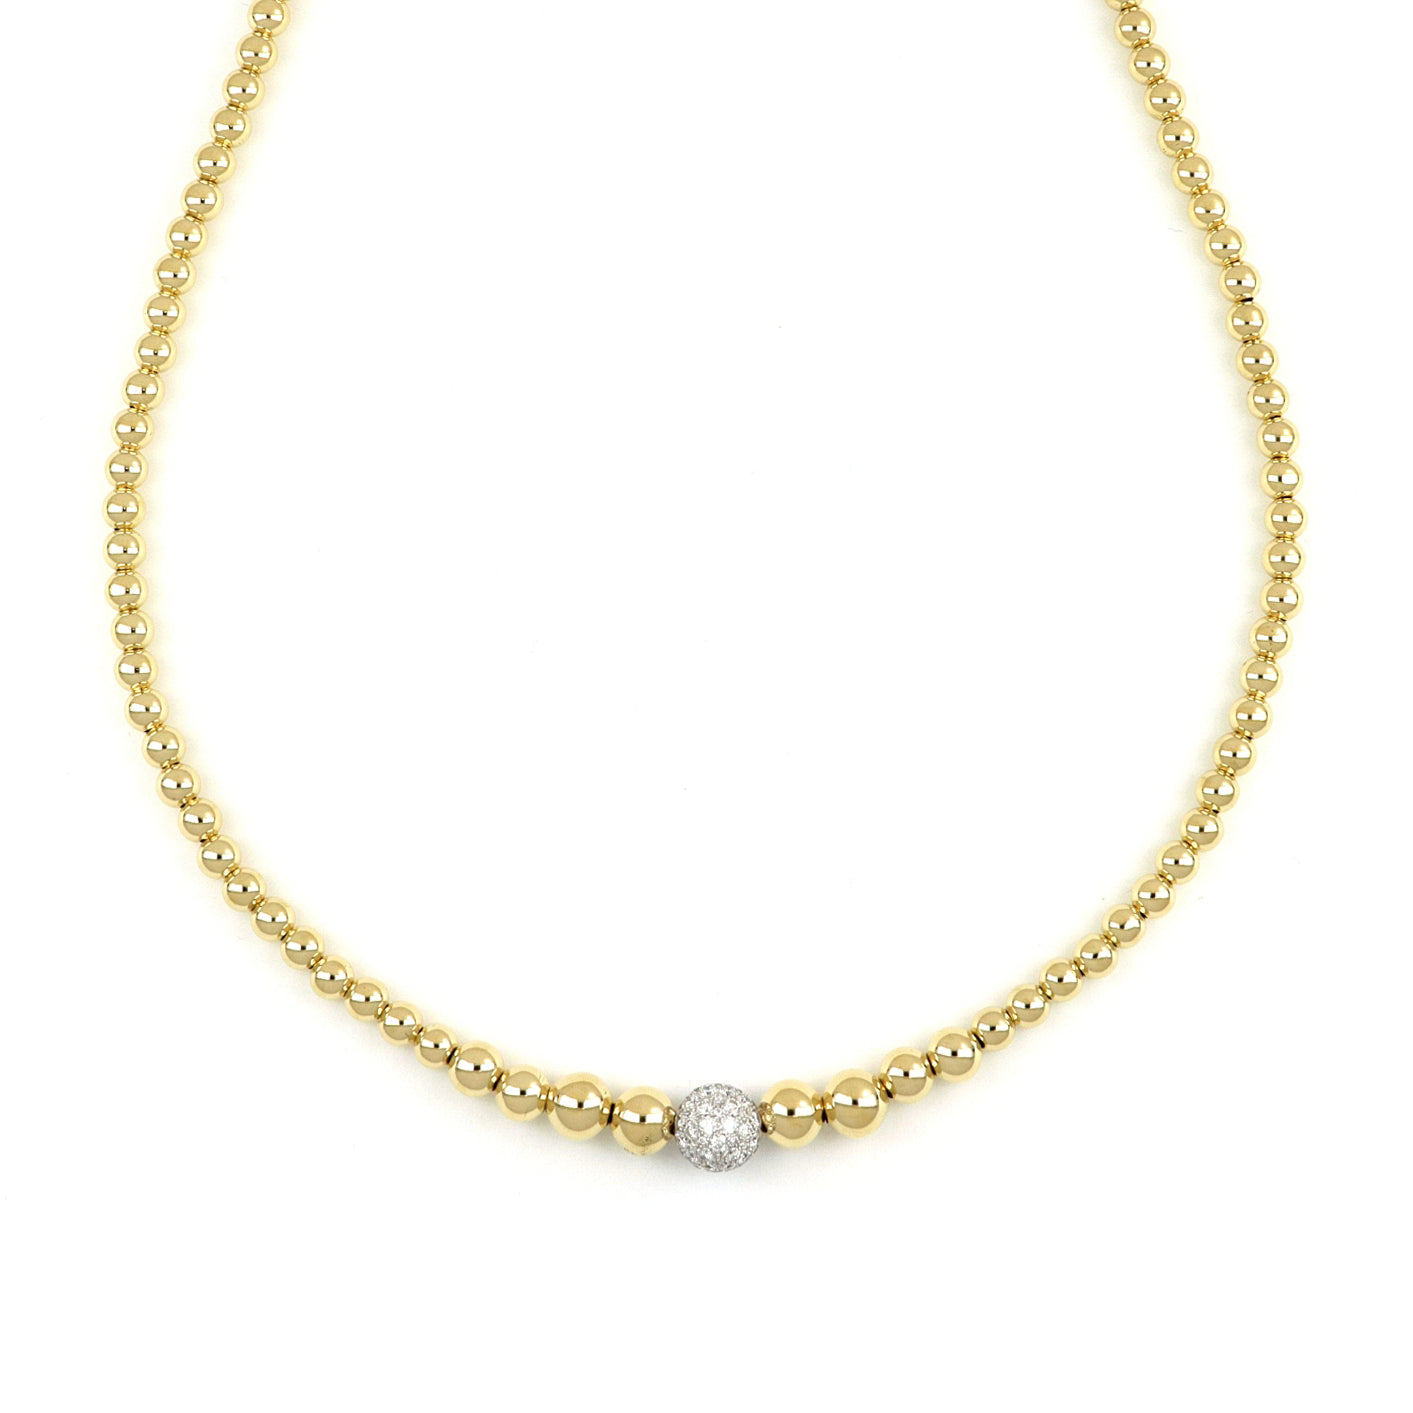 Video Universo Medium Necklace Graduated Spheres Polished Yellow Gold and Diamonds